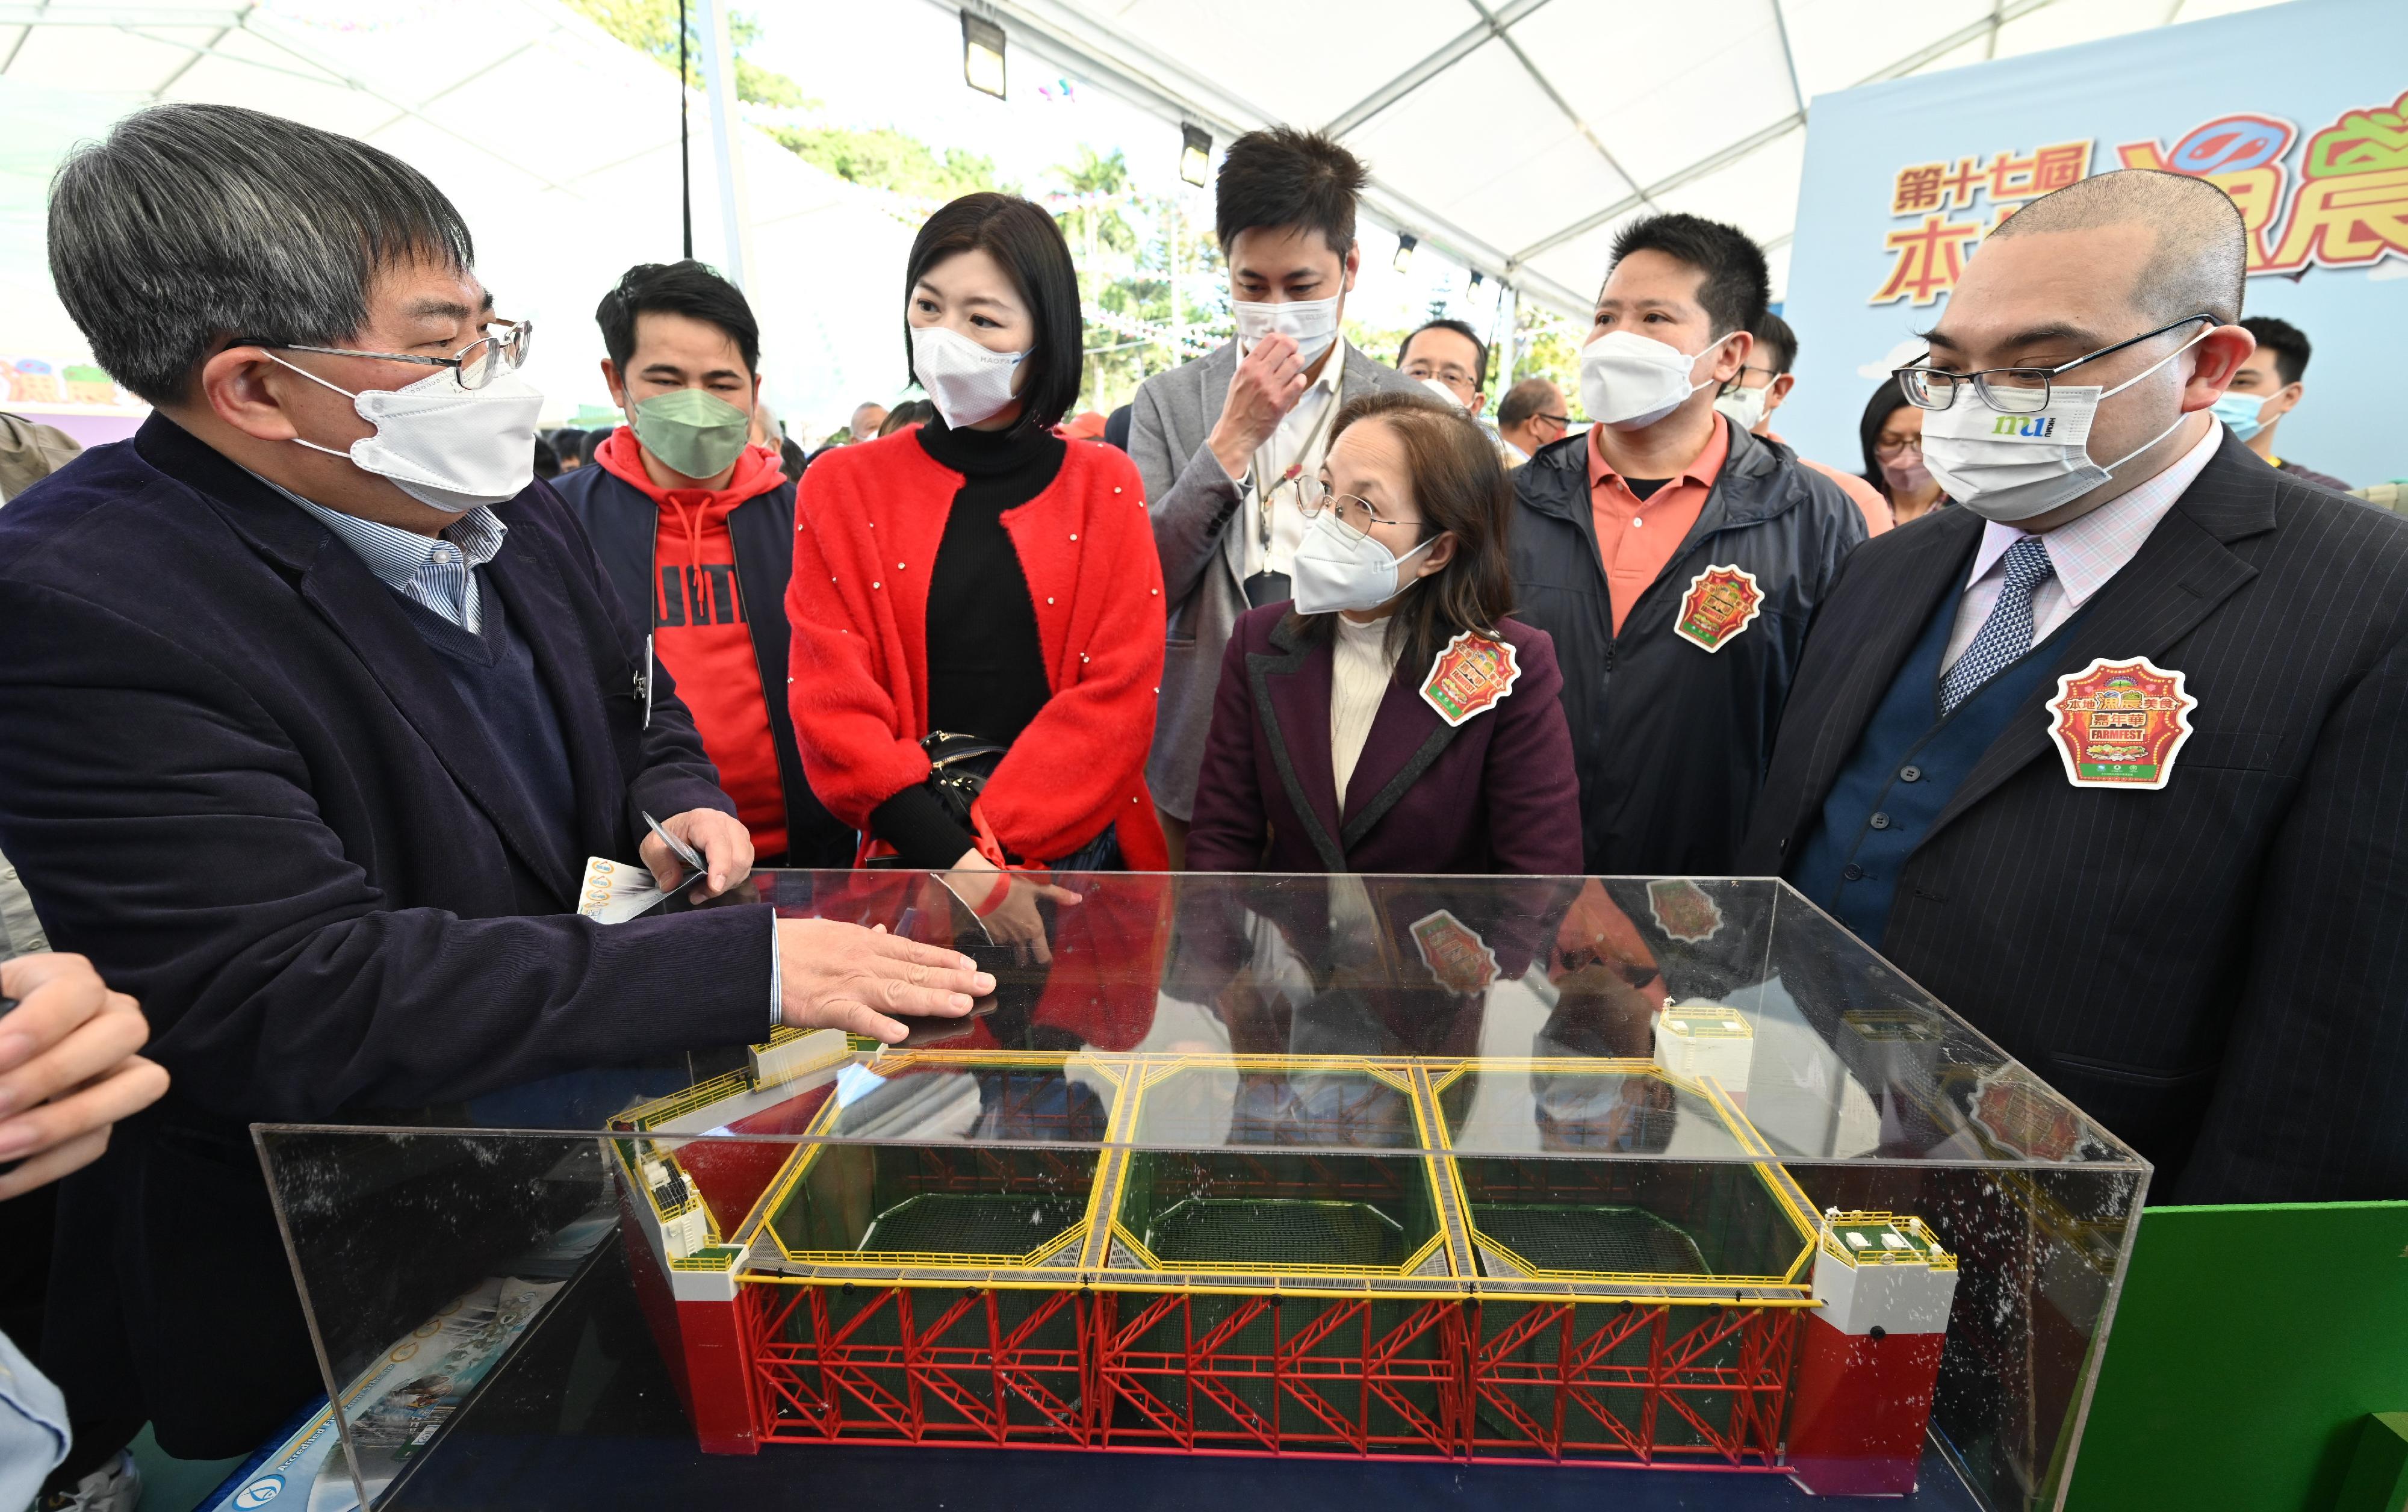 The 17th FarmFest is being held at Fa Hui Park in Mong Kok for three consecutive days between today (December 25) and December 27 to showcase a variety of local agricultural and fisheries products and other goods. Photo shows the Under Secretary for Environment and Ecology, Miss Diane Wong (front row, second right); the Chairman of the Organising Committee of FarmFest, Dr Eric Lau (front row, first right); Legislative Council members Mr Steven Ho (back row, centre) and Ms Yung Hoi-yan (front row, second left); the Director of Agriculture, Fisheries and Conservation, Dr Leung Siu-fai (front row, first left); and other guests viewing a semi-submersible steel truss deep sea cage model exhibited in the fisheries zone.